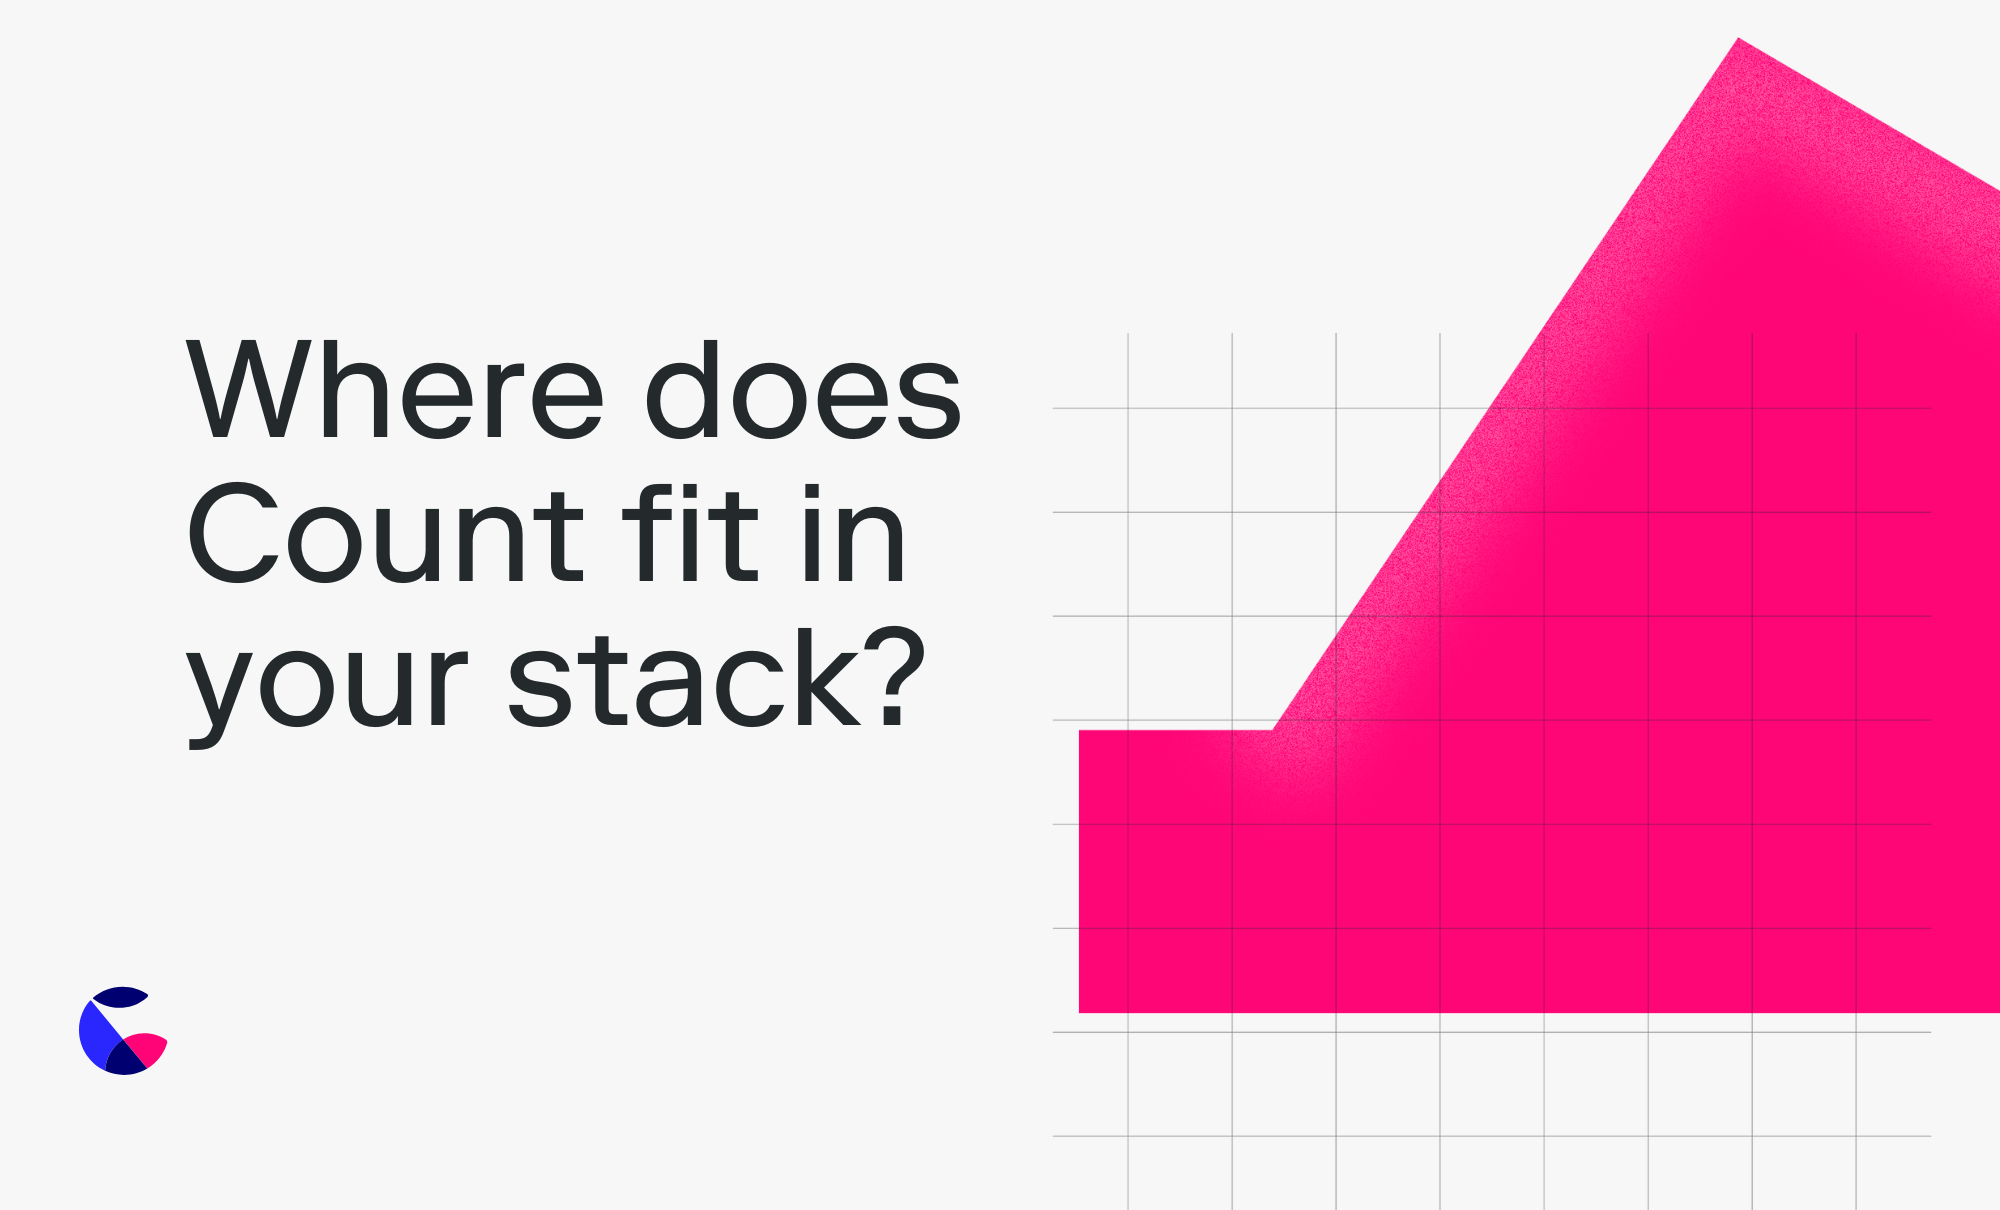 Where does Count fit in your stack?